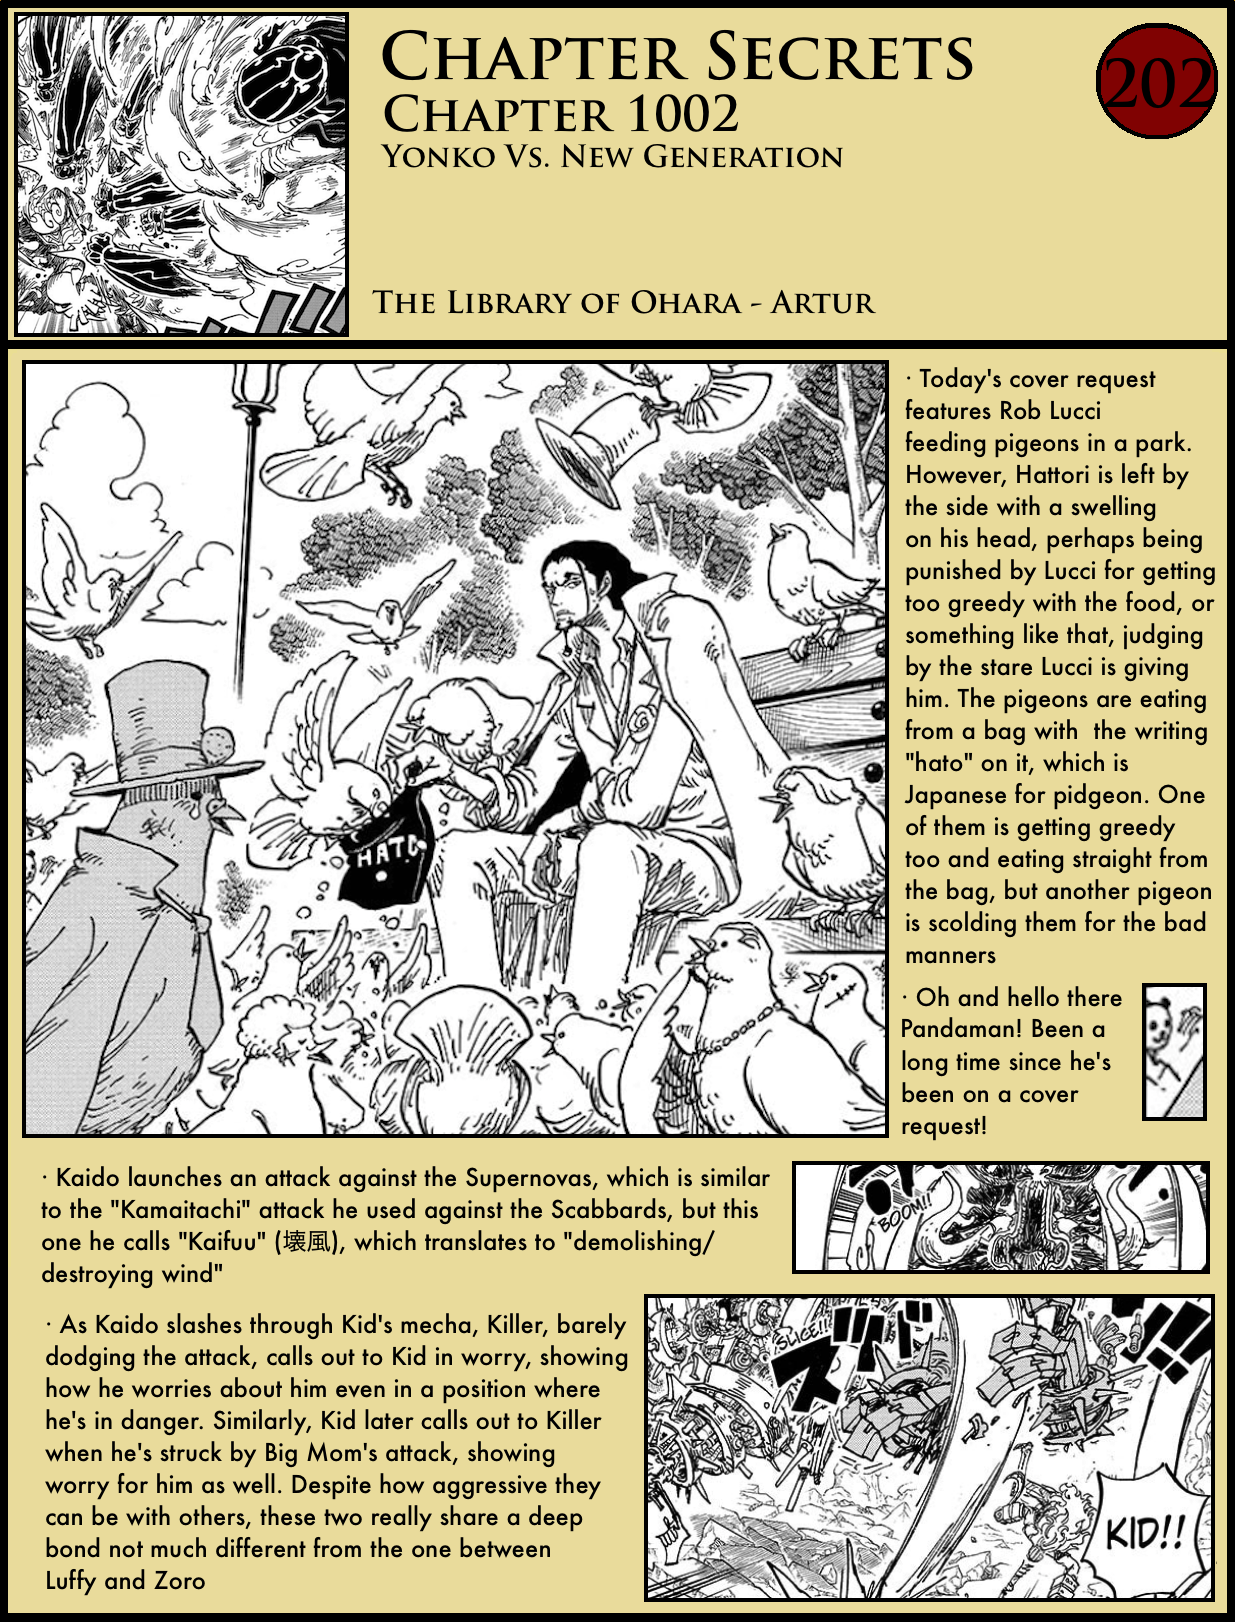 Chapter Secrets – Chapter 1001 in-depth analysis – The Library of Ohara